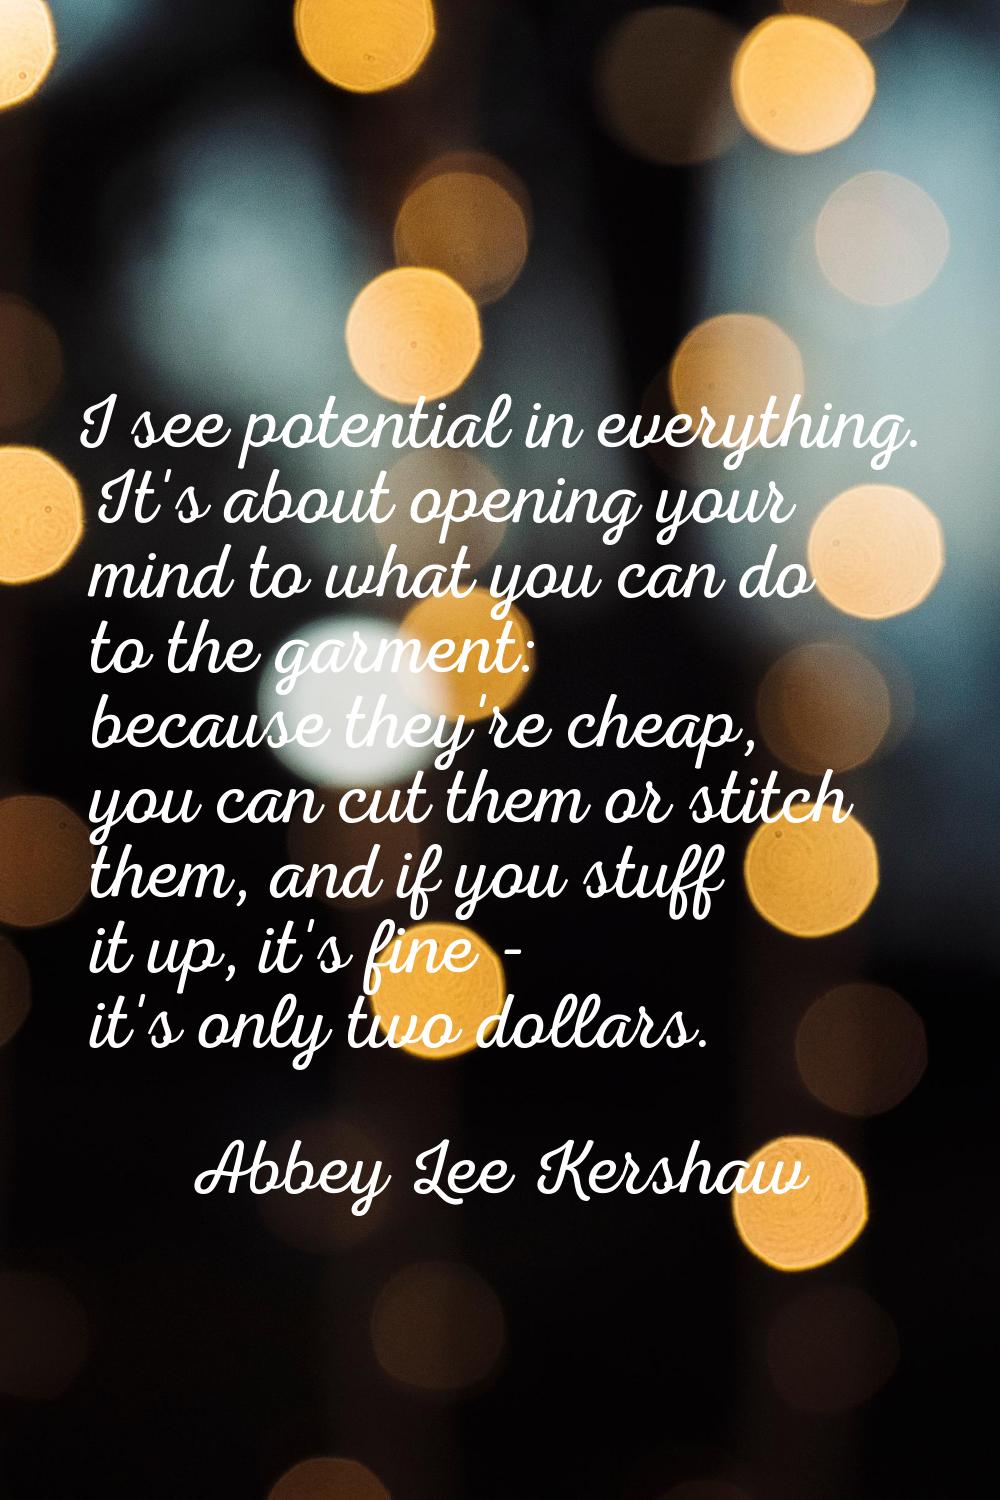 I see potential in everything. It's about opening your mind to what you can do to the garment: beca